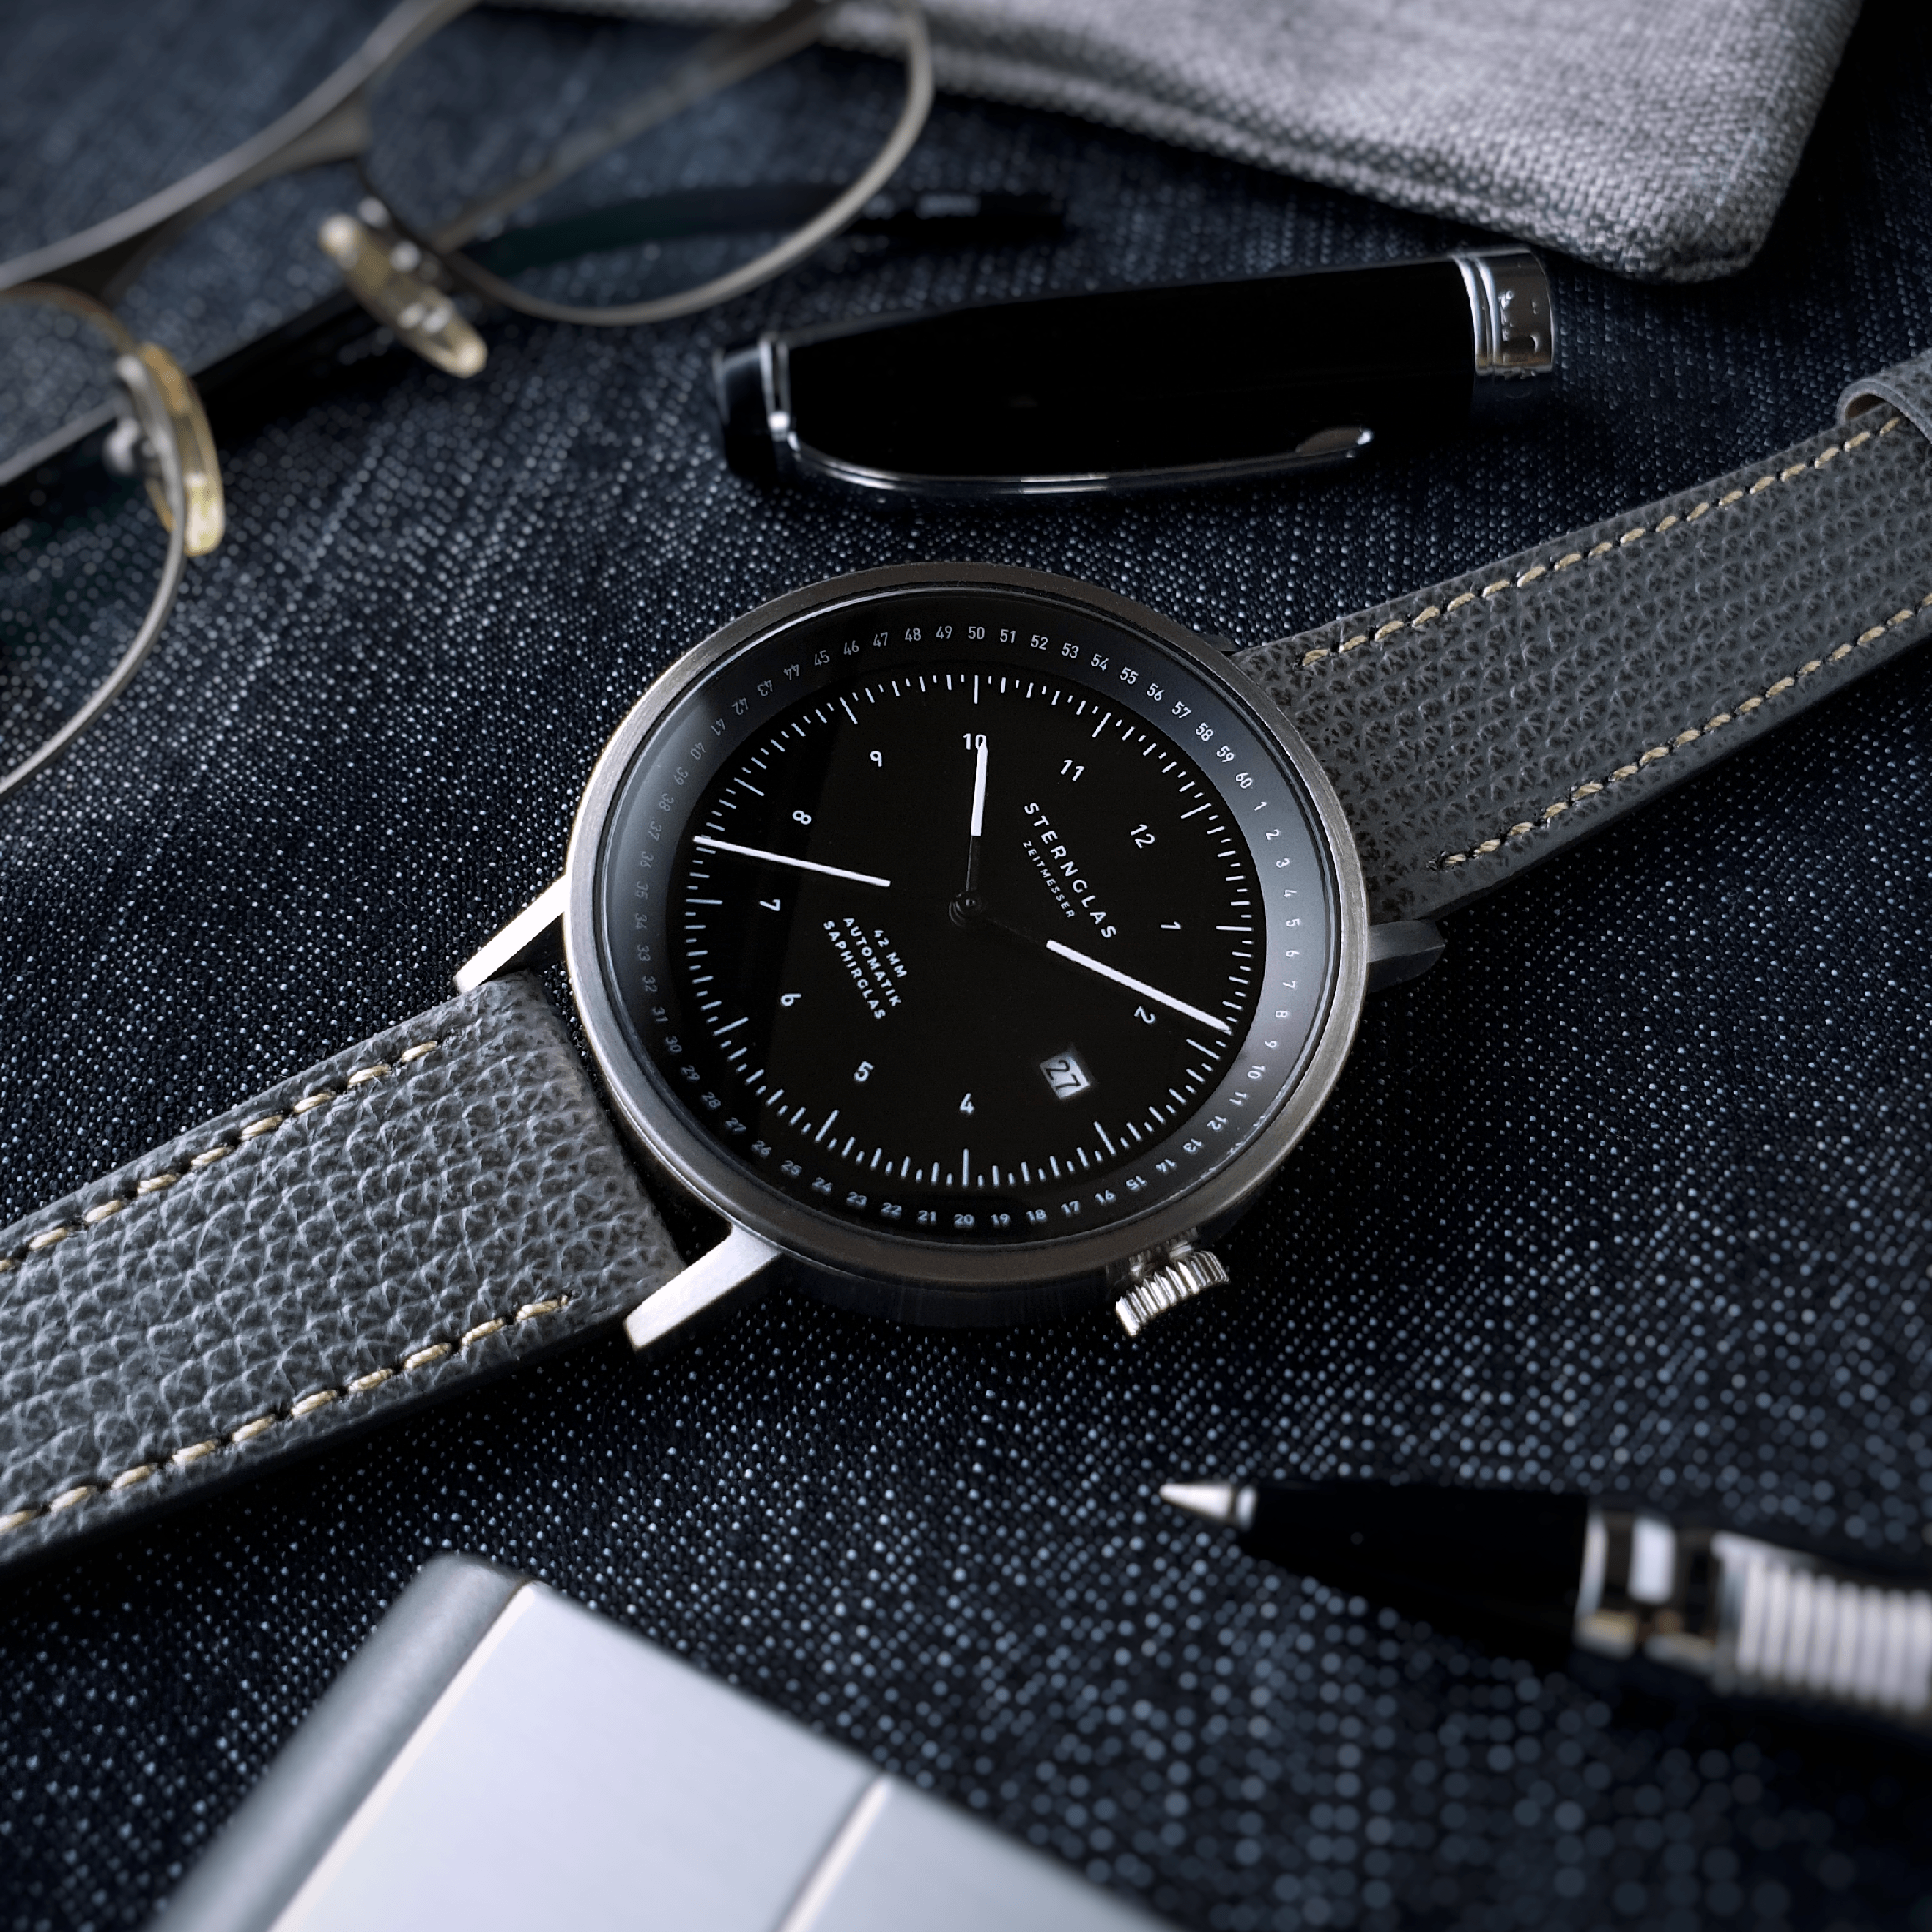 Check out this awesome photo by @dp.graphics featuring our Italian leather on Sternglas watch